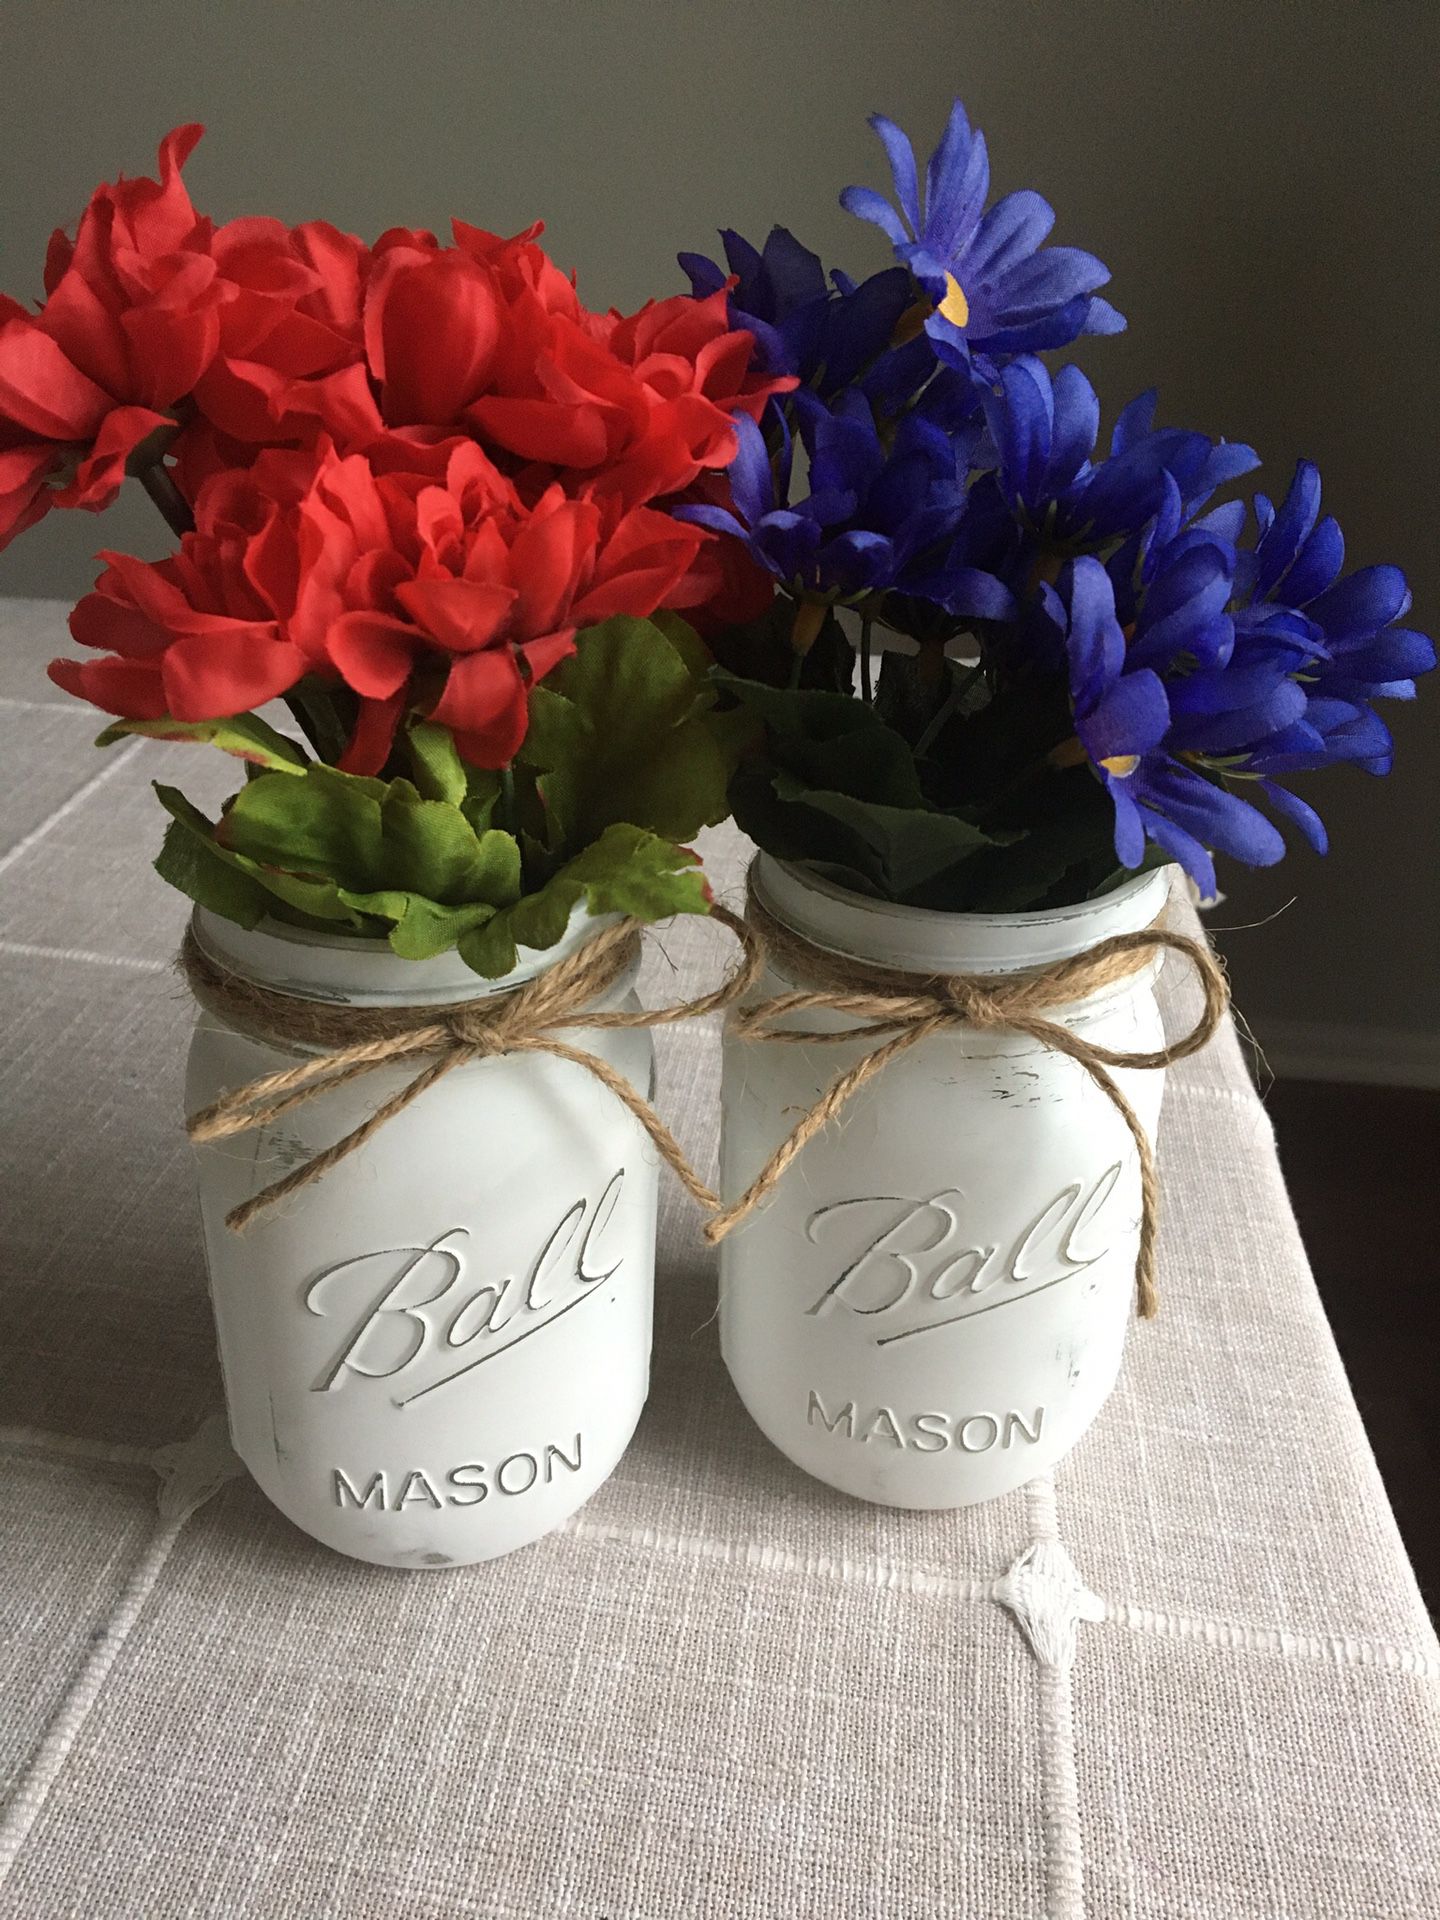 Distressed mason jar vases with silk flowers $10 for both